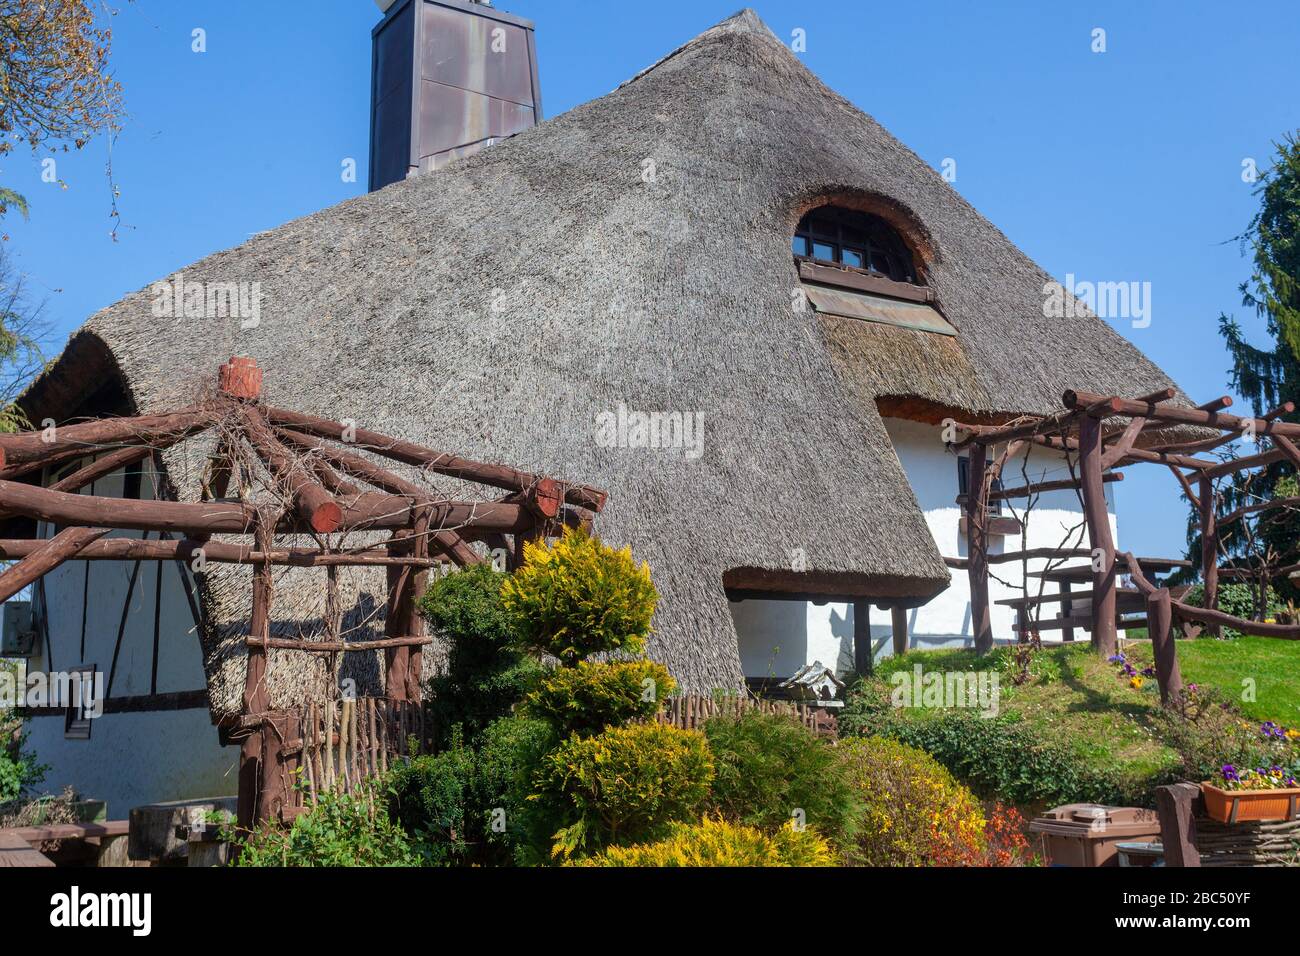 Traditional rural house with a thatched roof in Podravina region of Croatia (PRC) - Restaurant Podravska klet on PRC Stock Photo